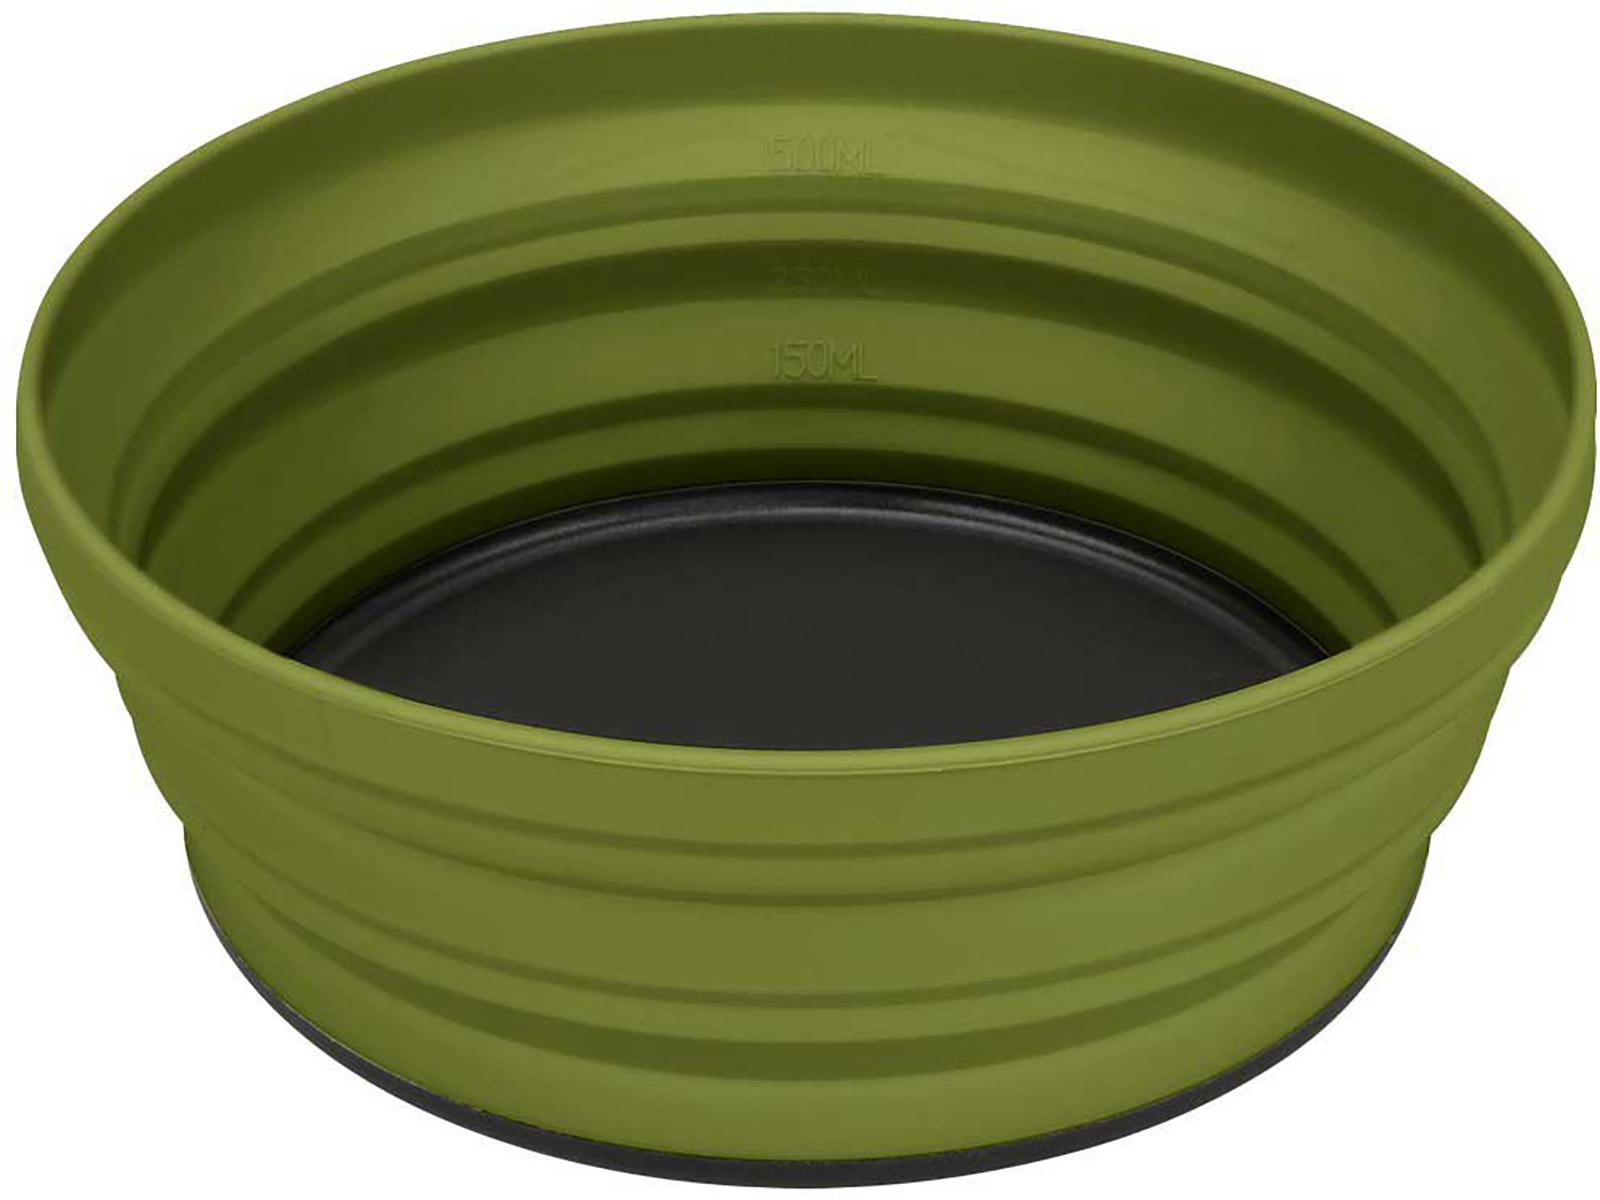 Sea To Summit X-bowl Collapsible Bowl - Olive